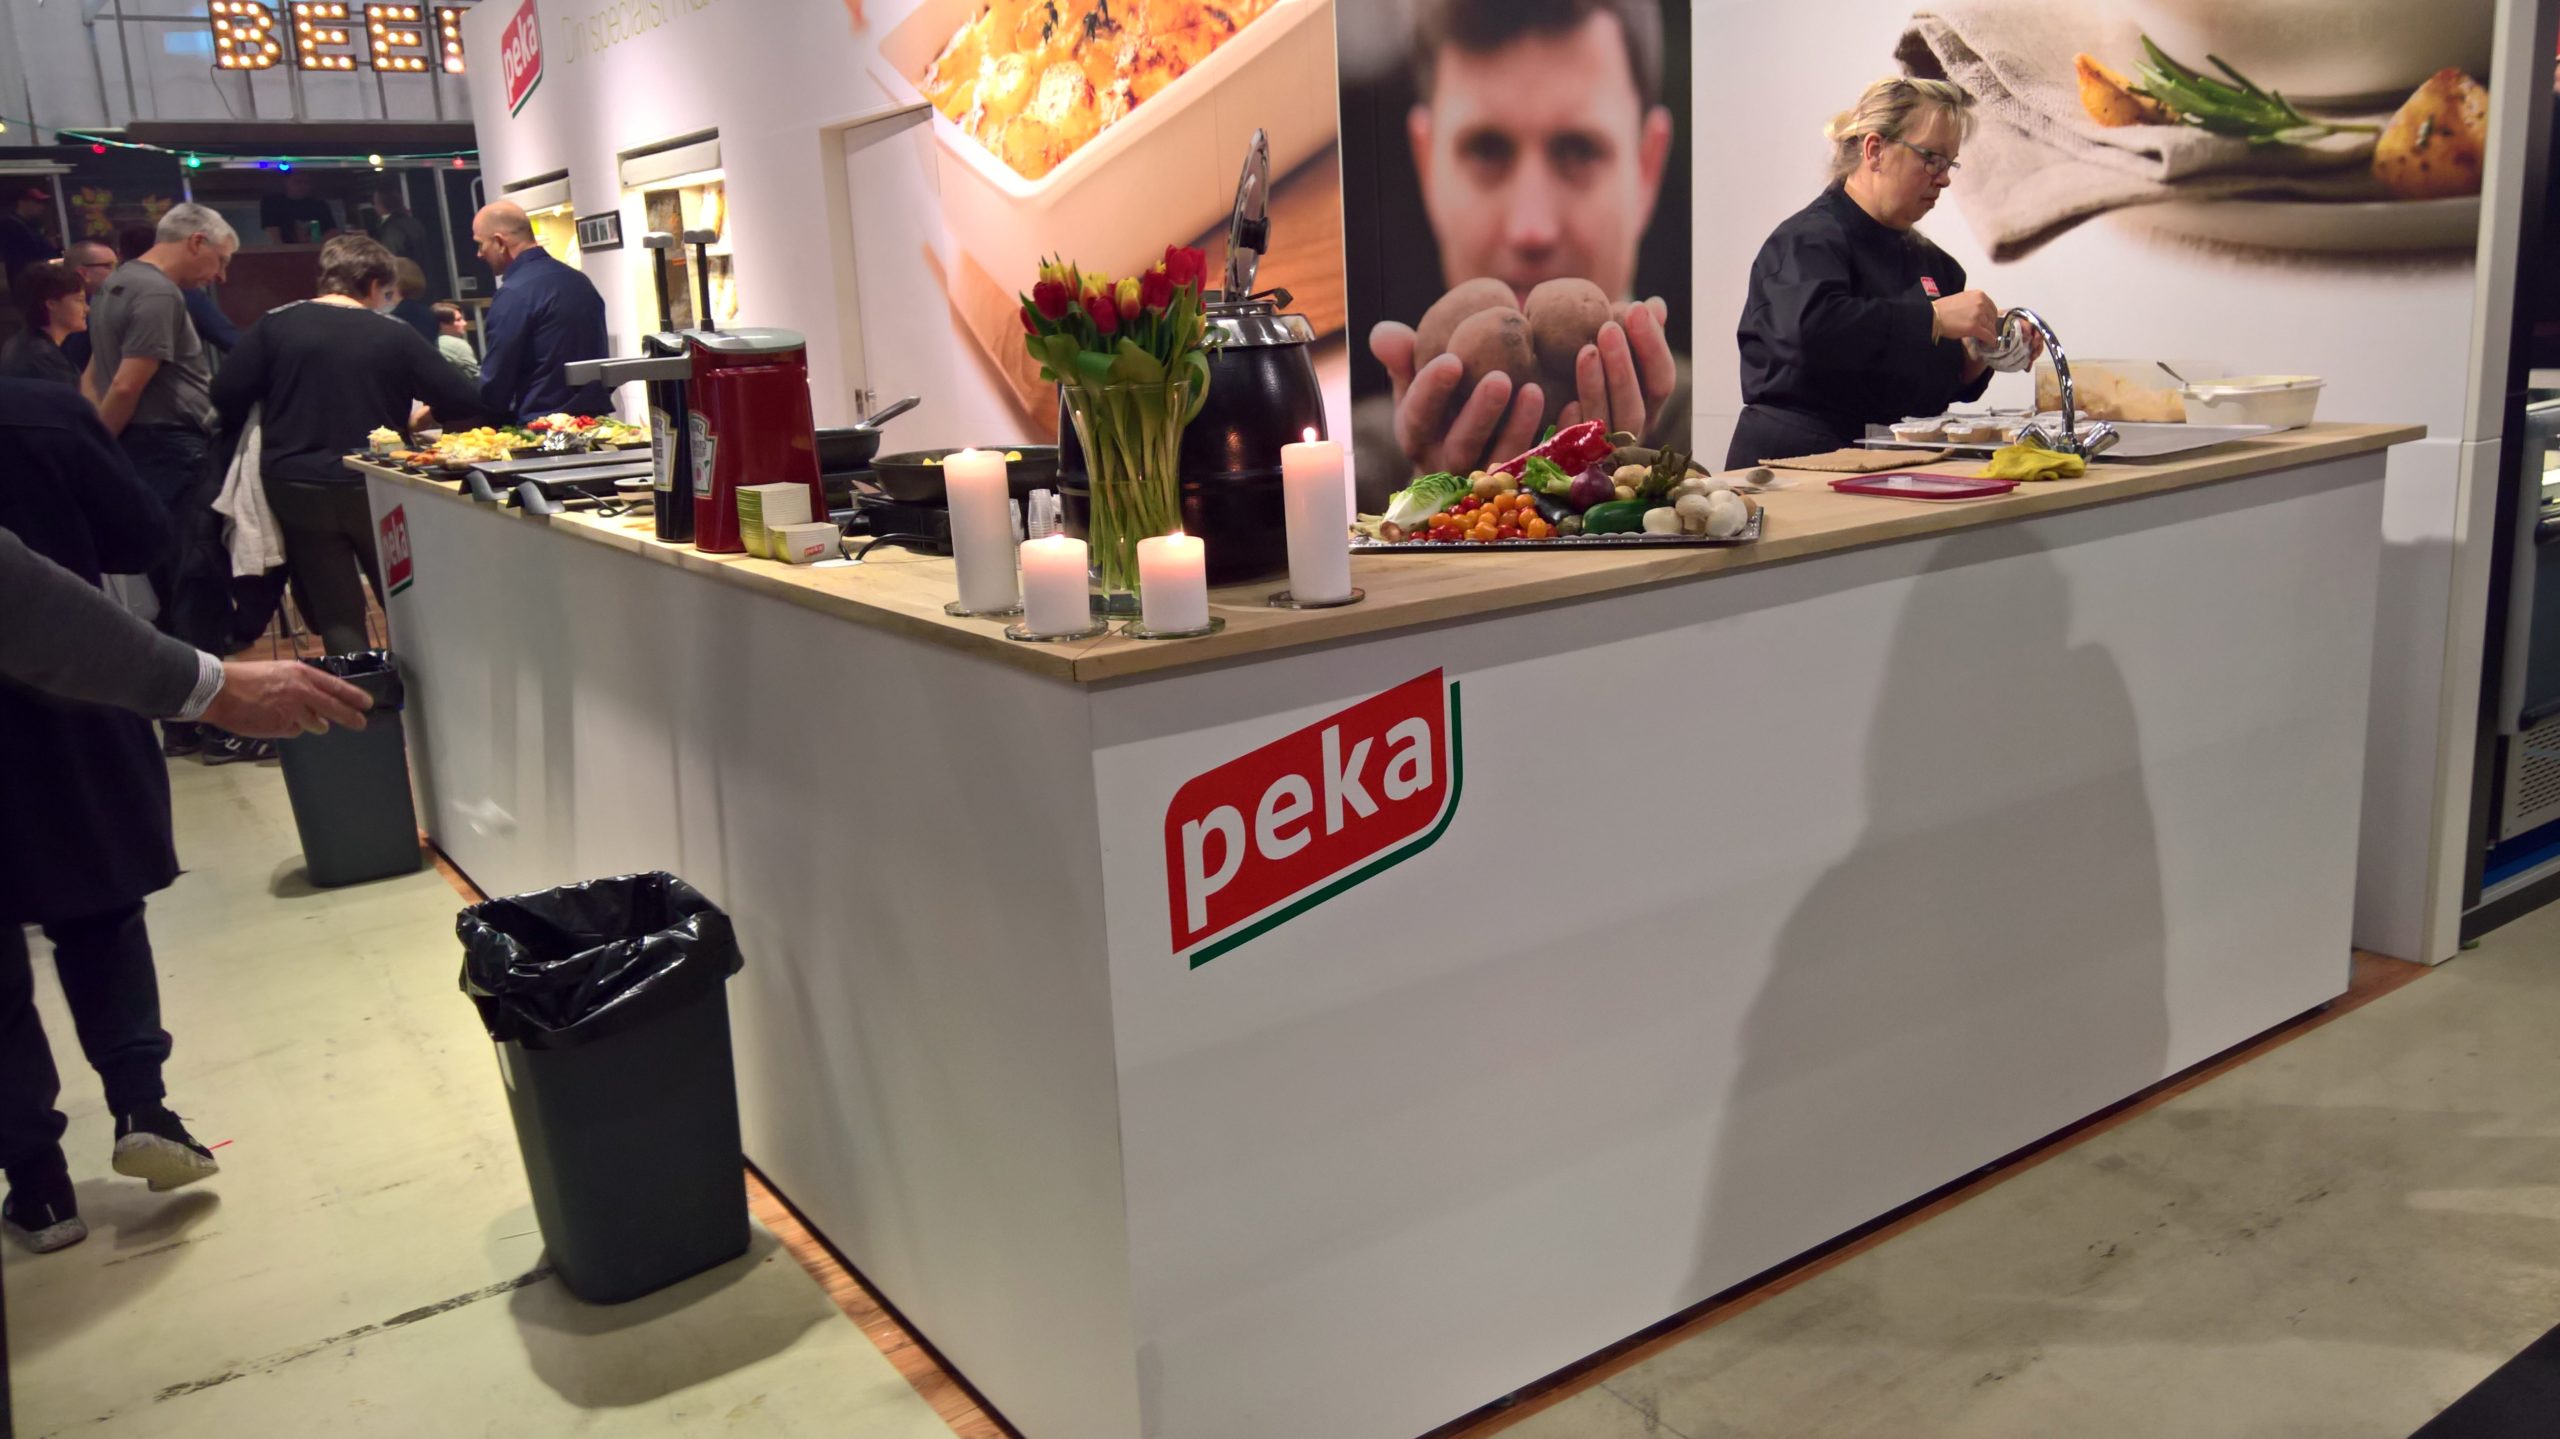 Standesign stand for Peka